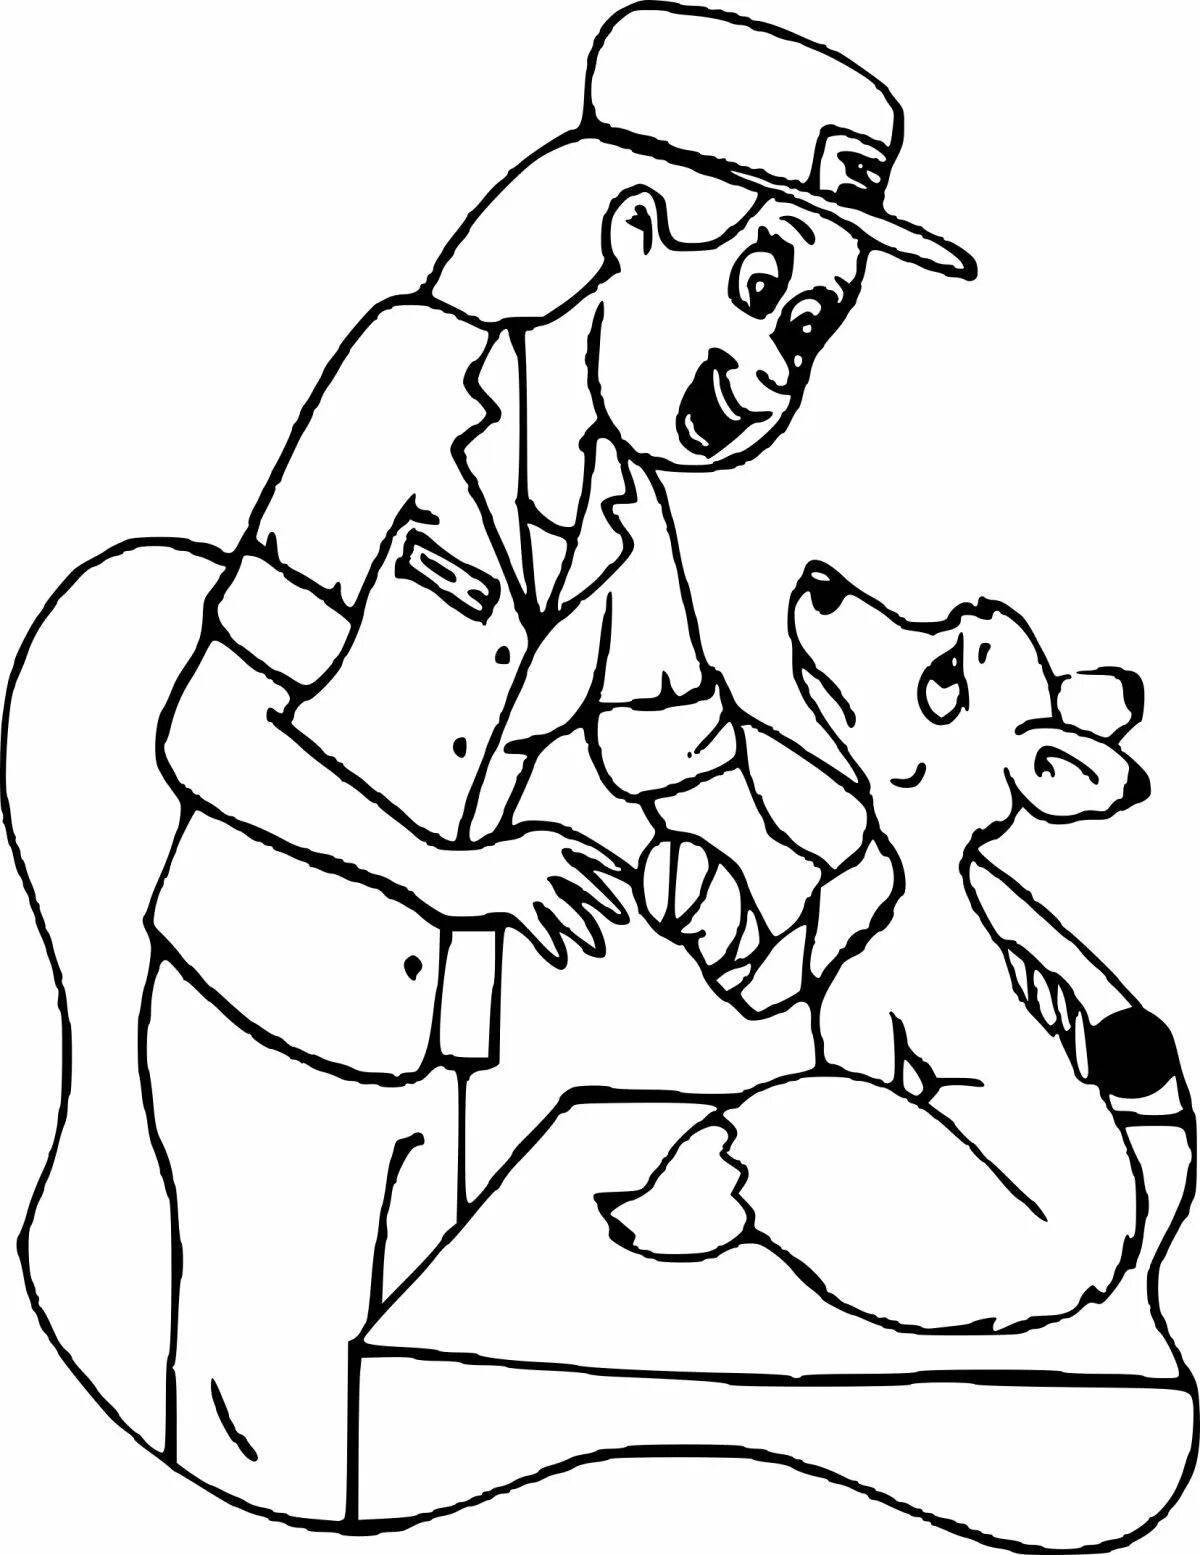 Colorful vet coloring page